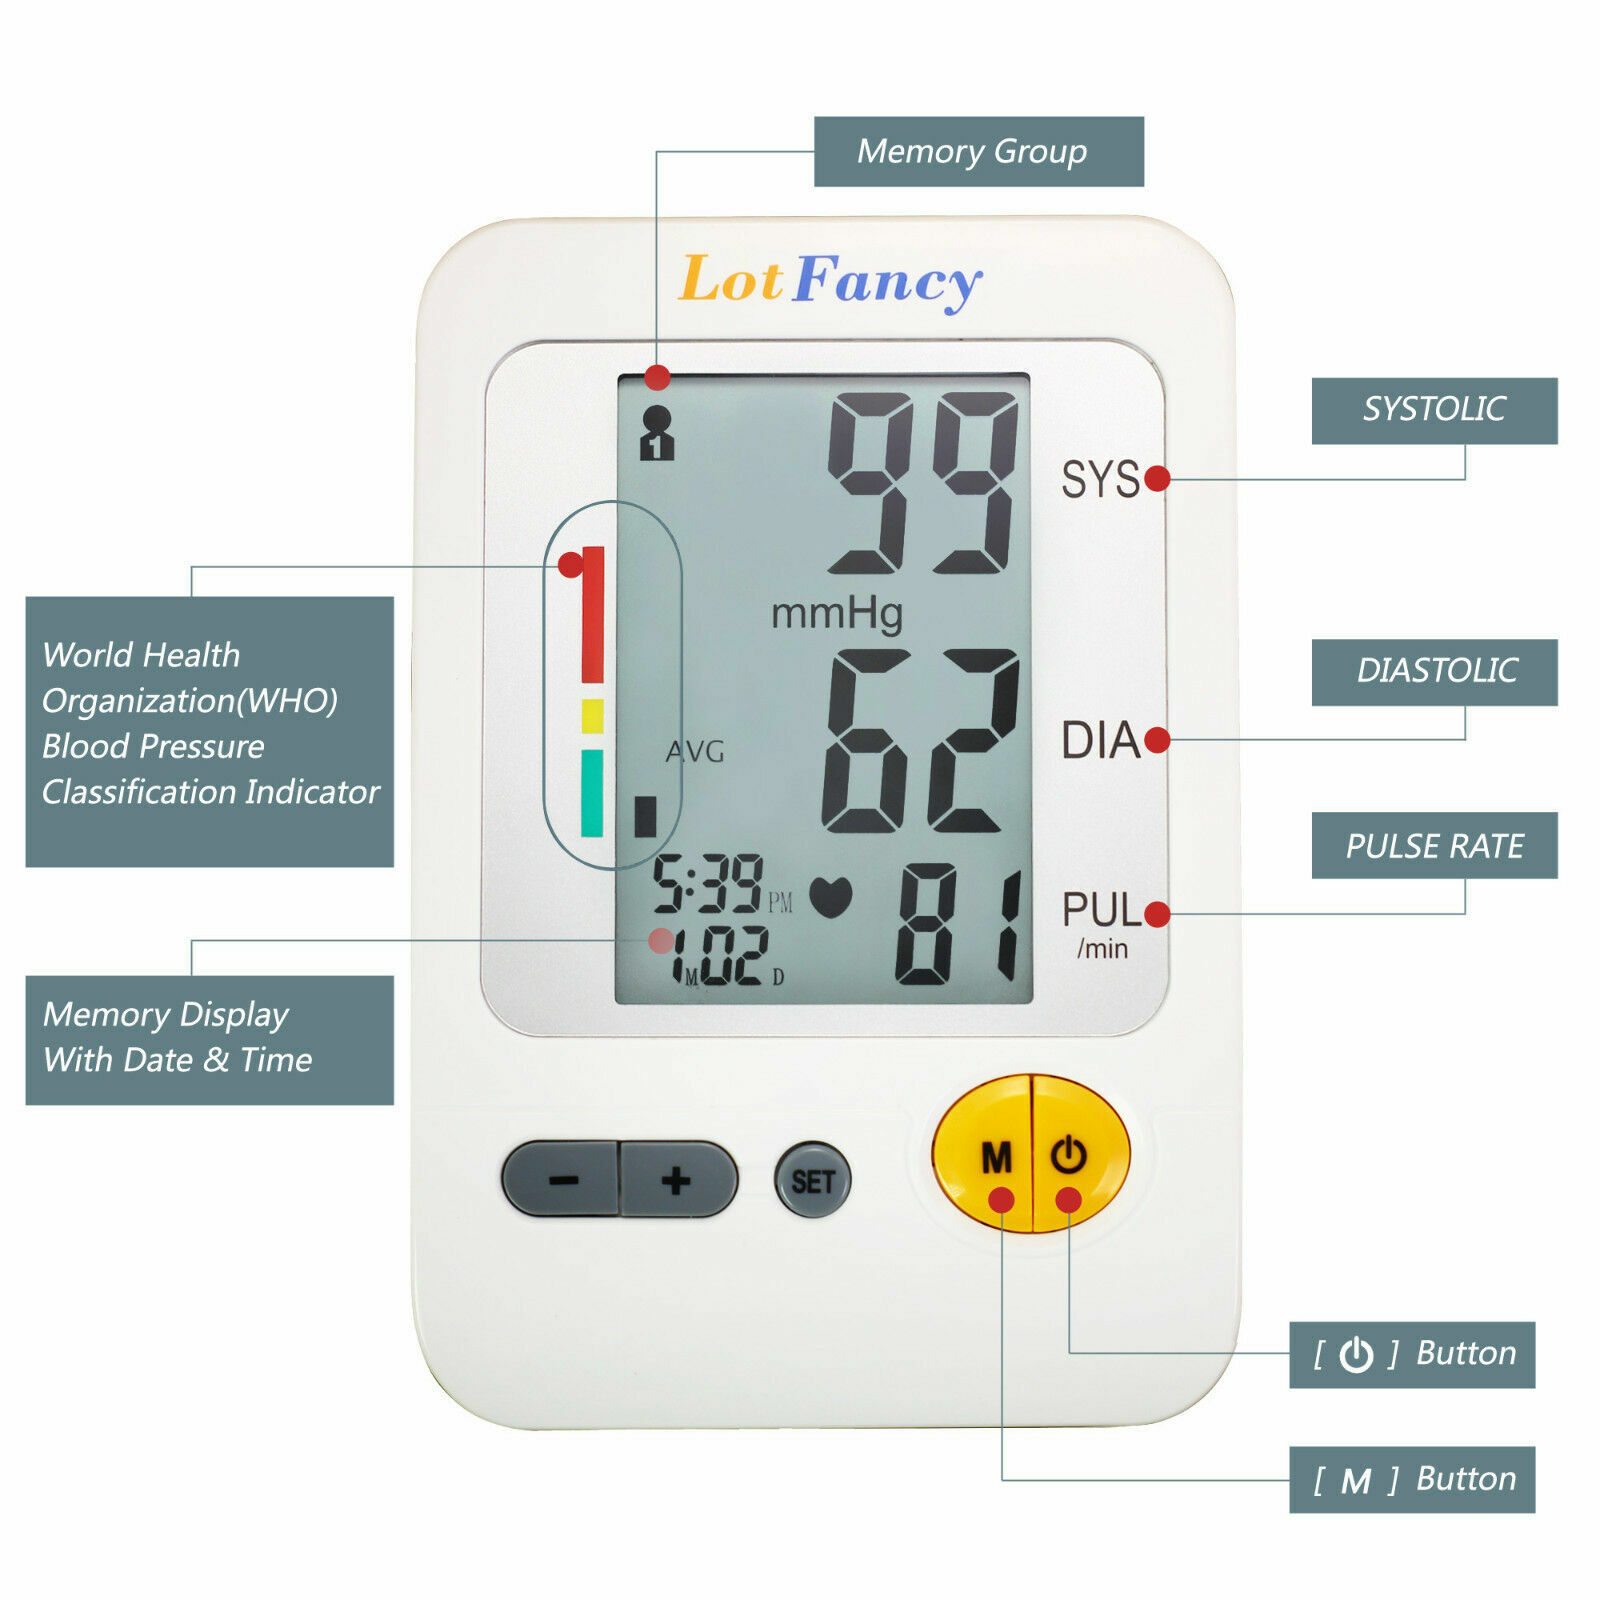 Automatic Digital Arm Blood Pressure Monitor Heart Rate Machine Meter BP Cuff LotFancy Does Not Apply - фотография #2